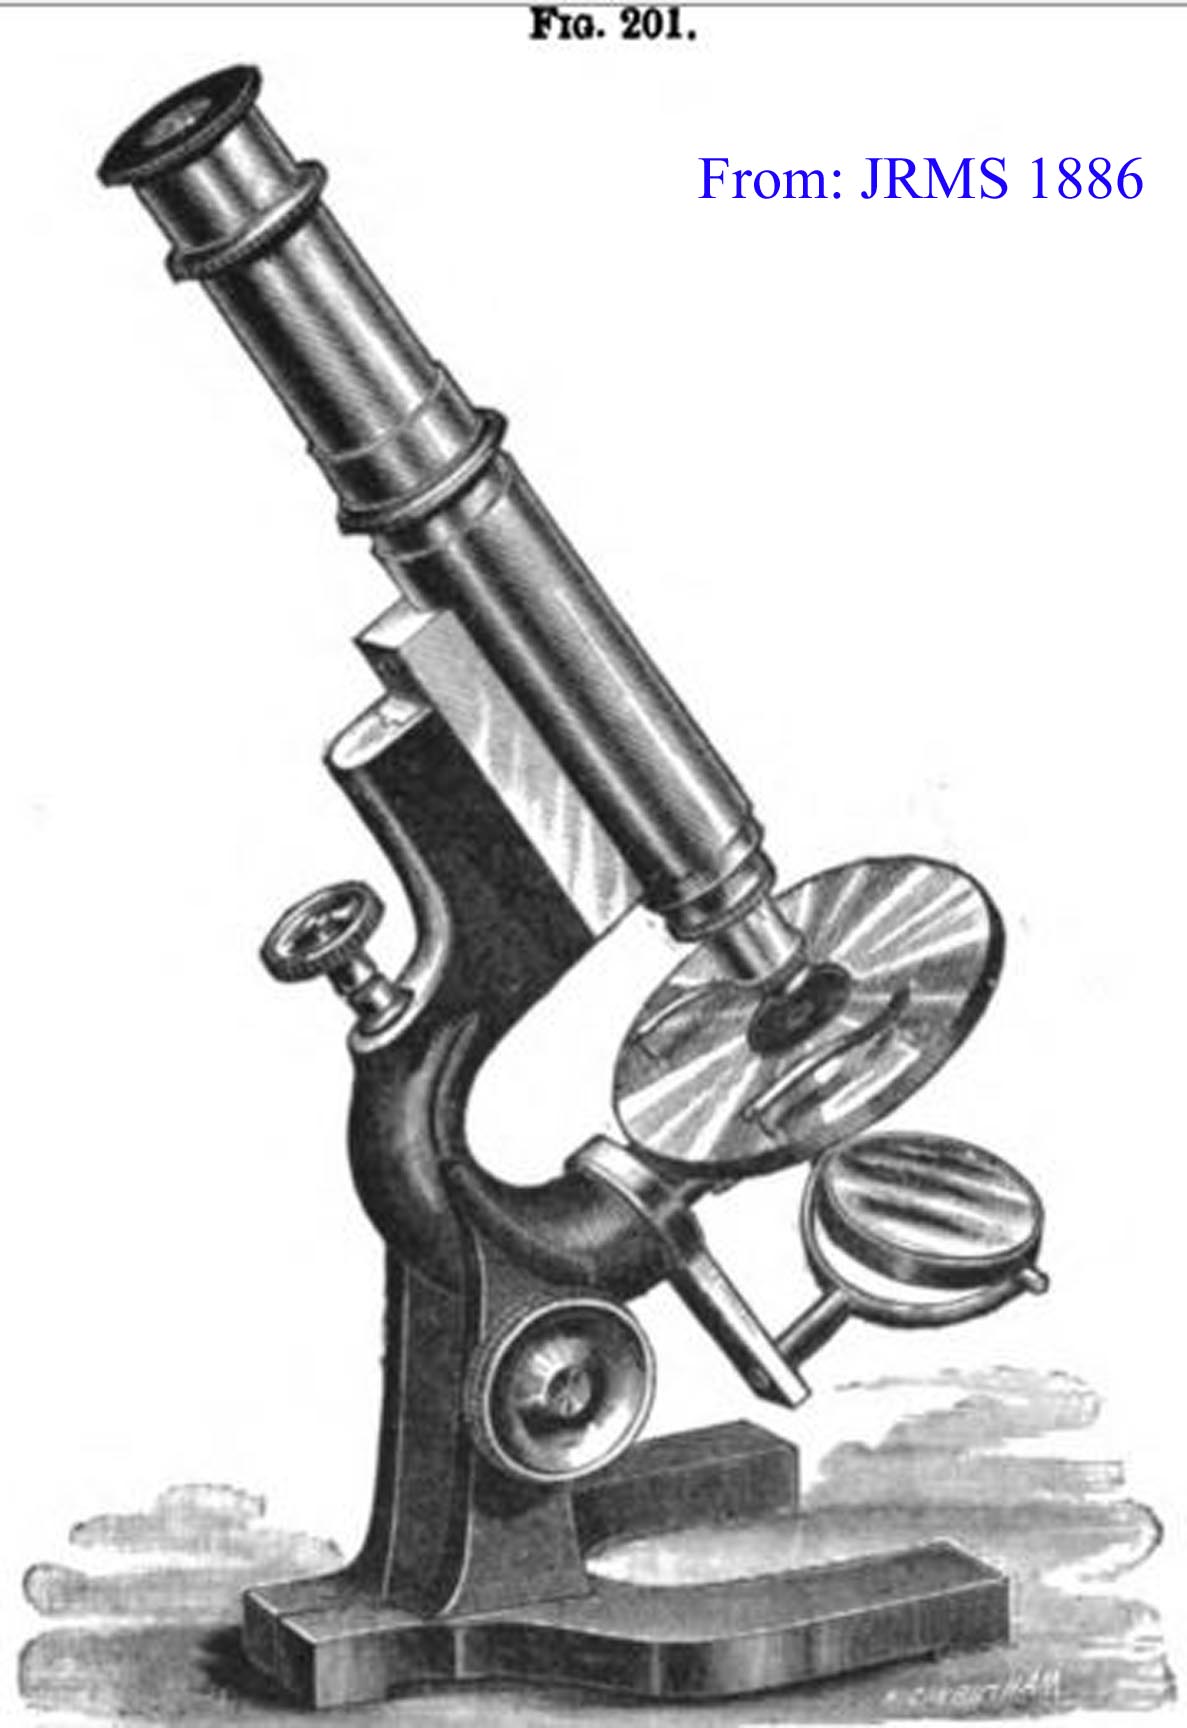 Bausch and Lomb Wale Limb JRMS 1886